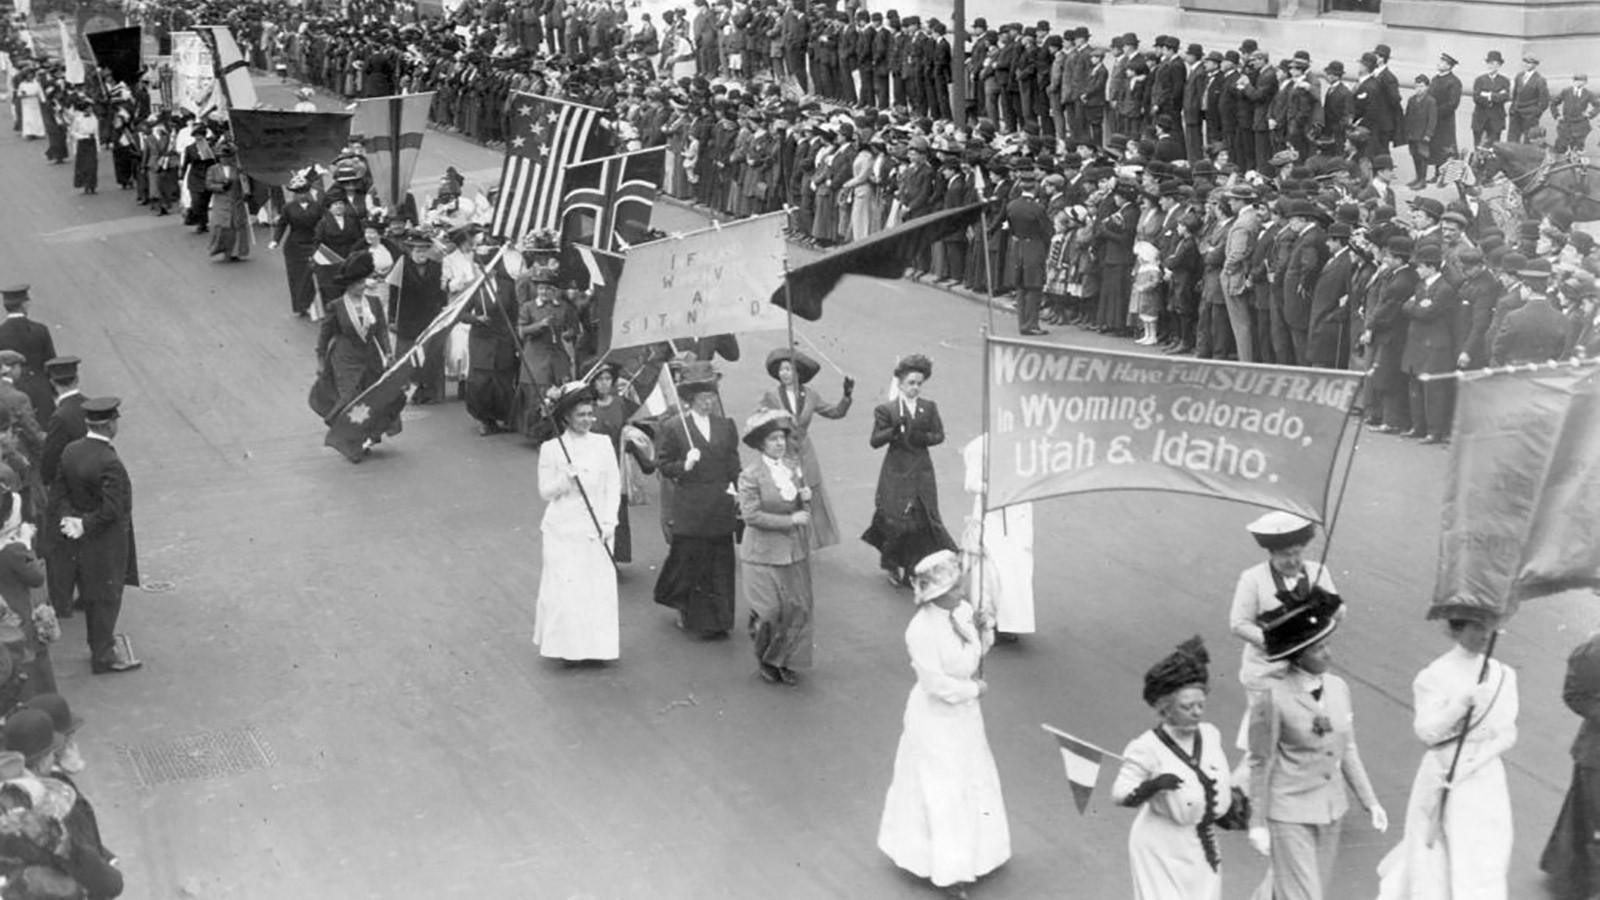 USU Reflects on the 1913 Women&amp;#39;s Suffrage Parade